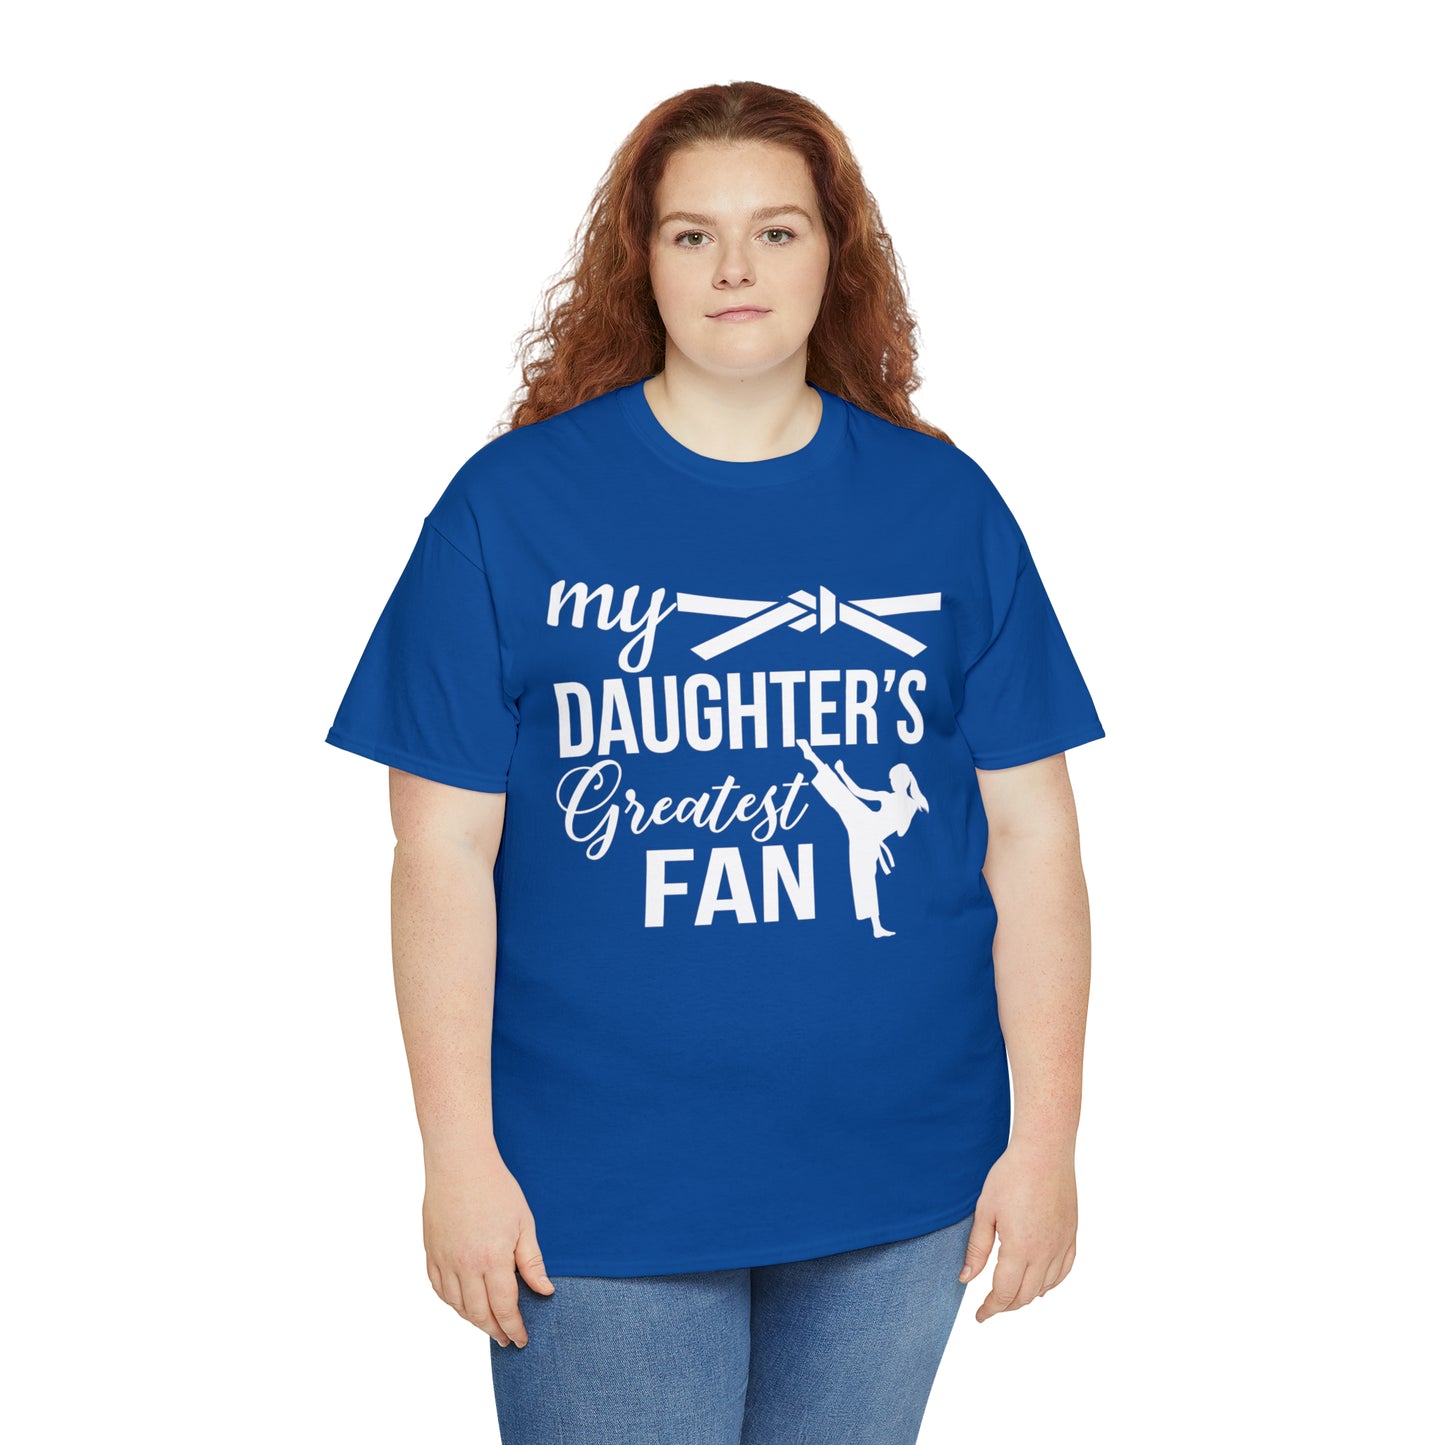 My Daughter's Greatest Fan! Shirt For Moms or Dads Heavy Cotton Tee